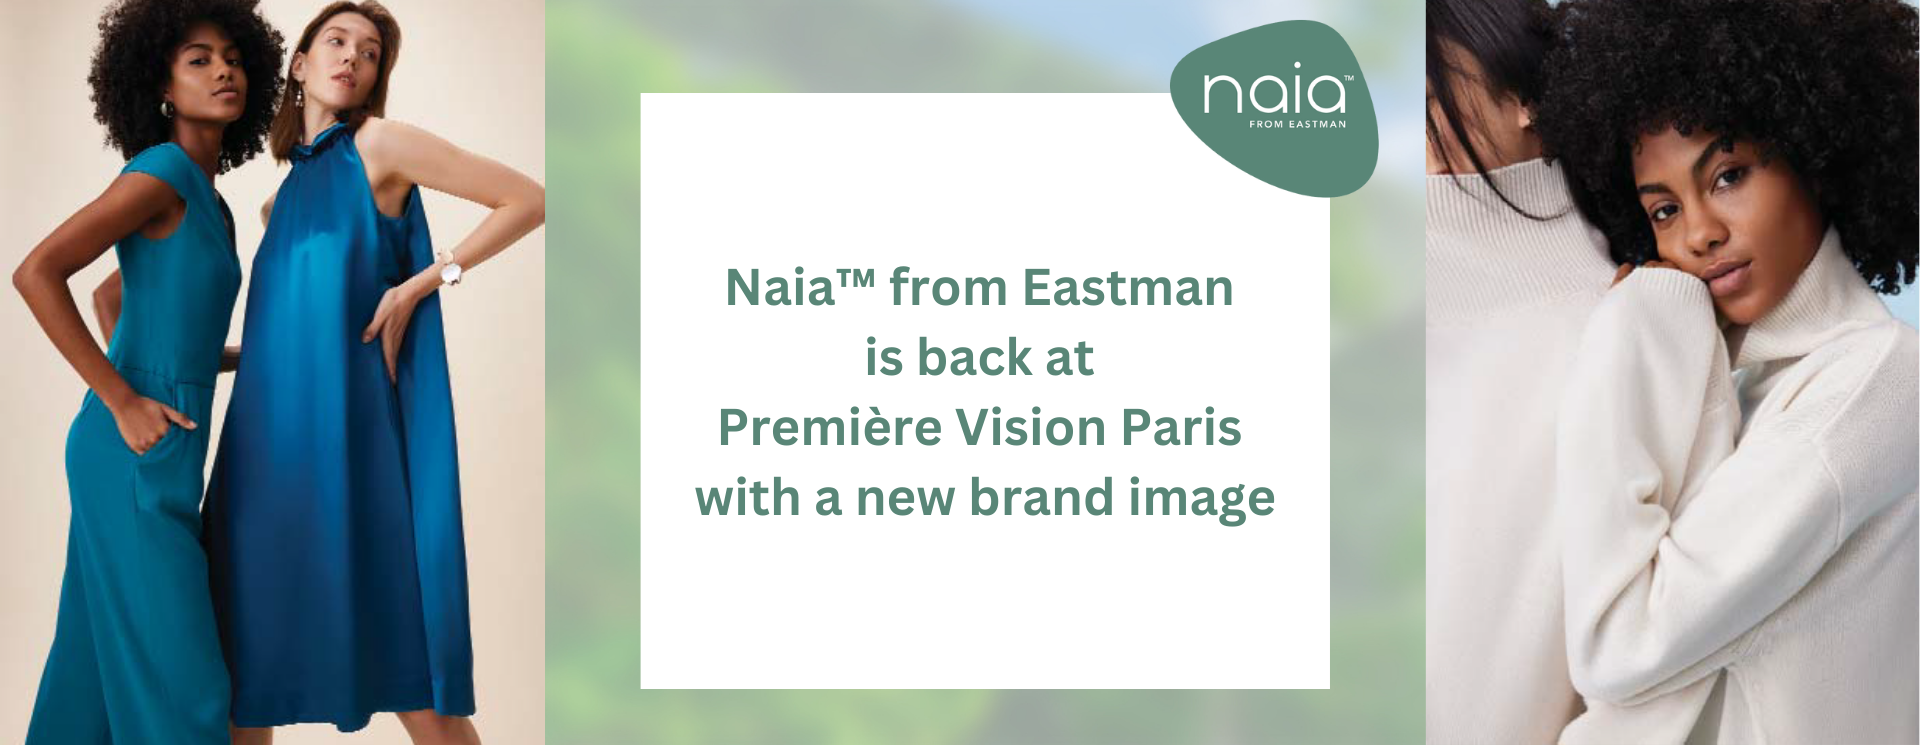  Naia™ from Eastman is back at Première Vision Paris with a new brand image